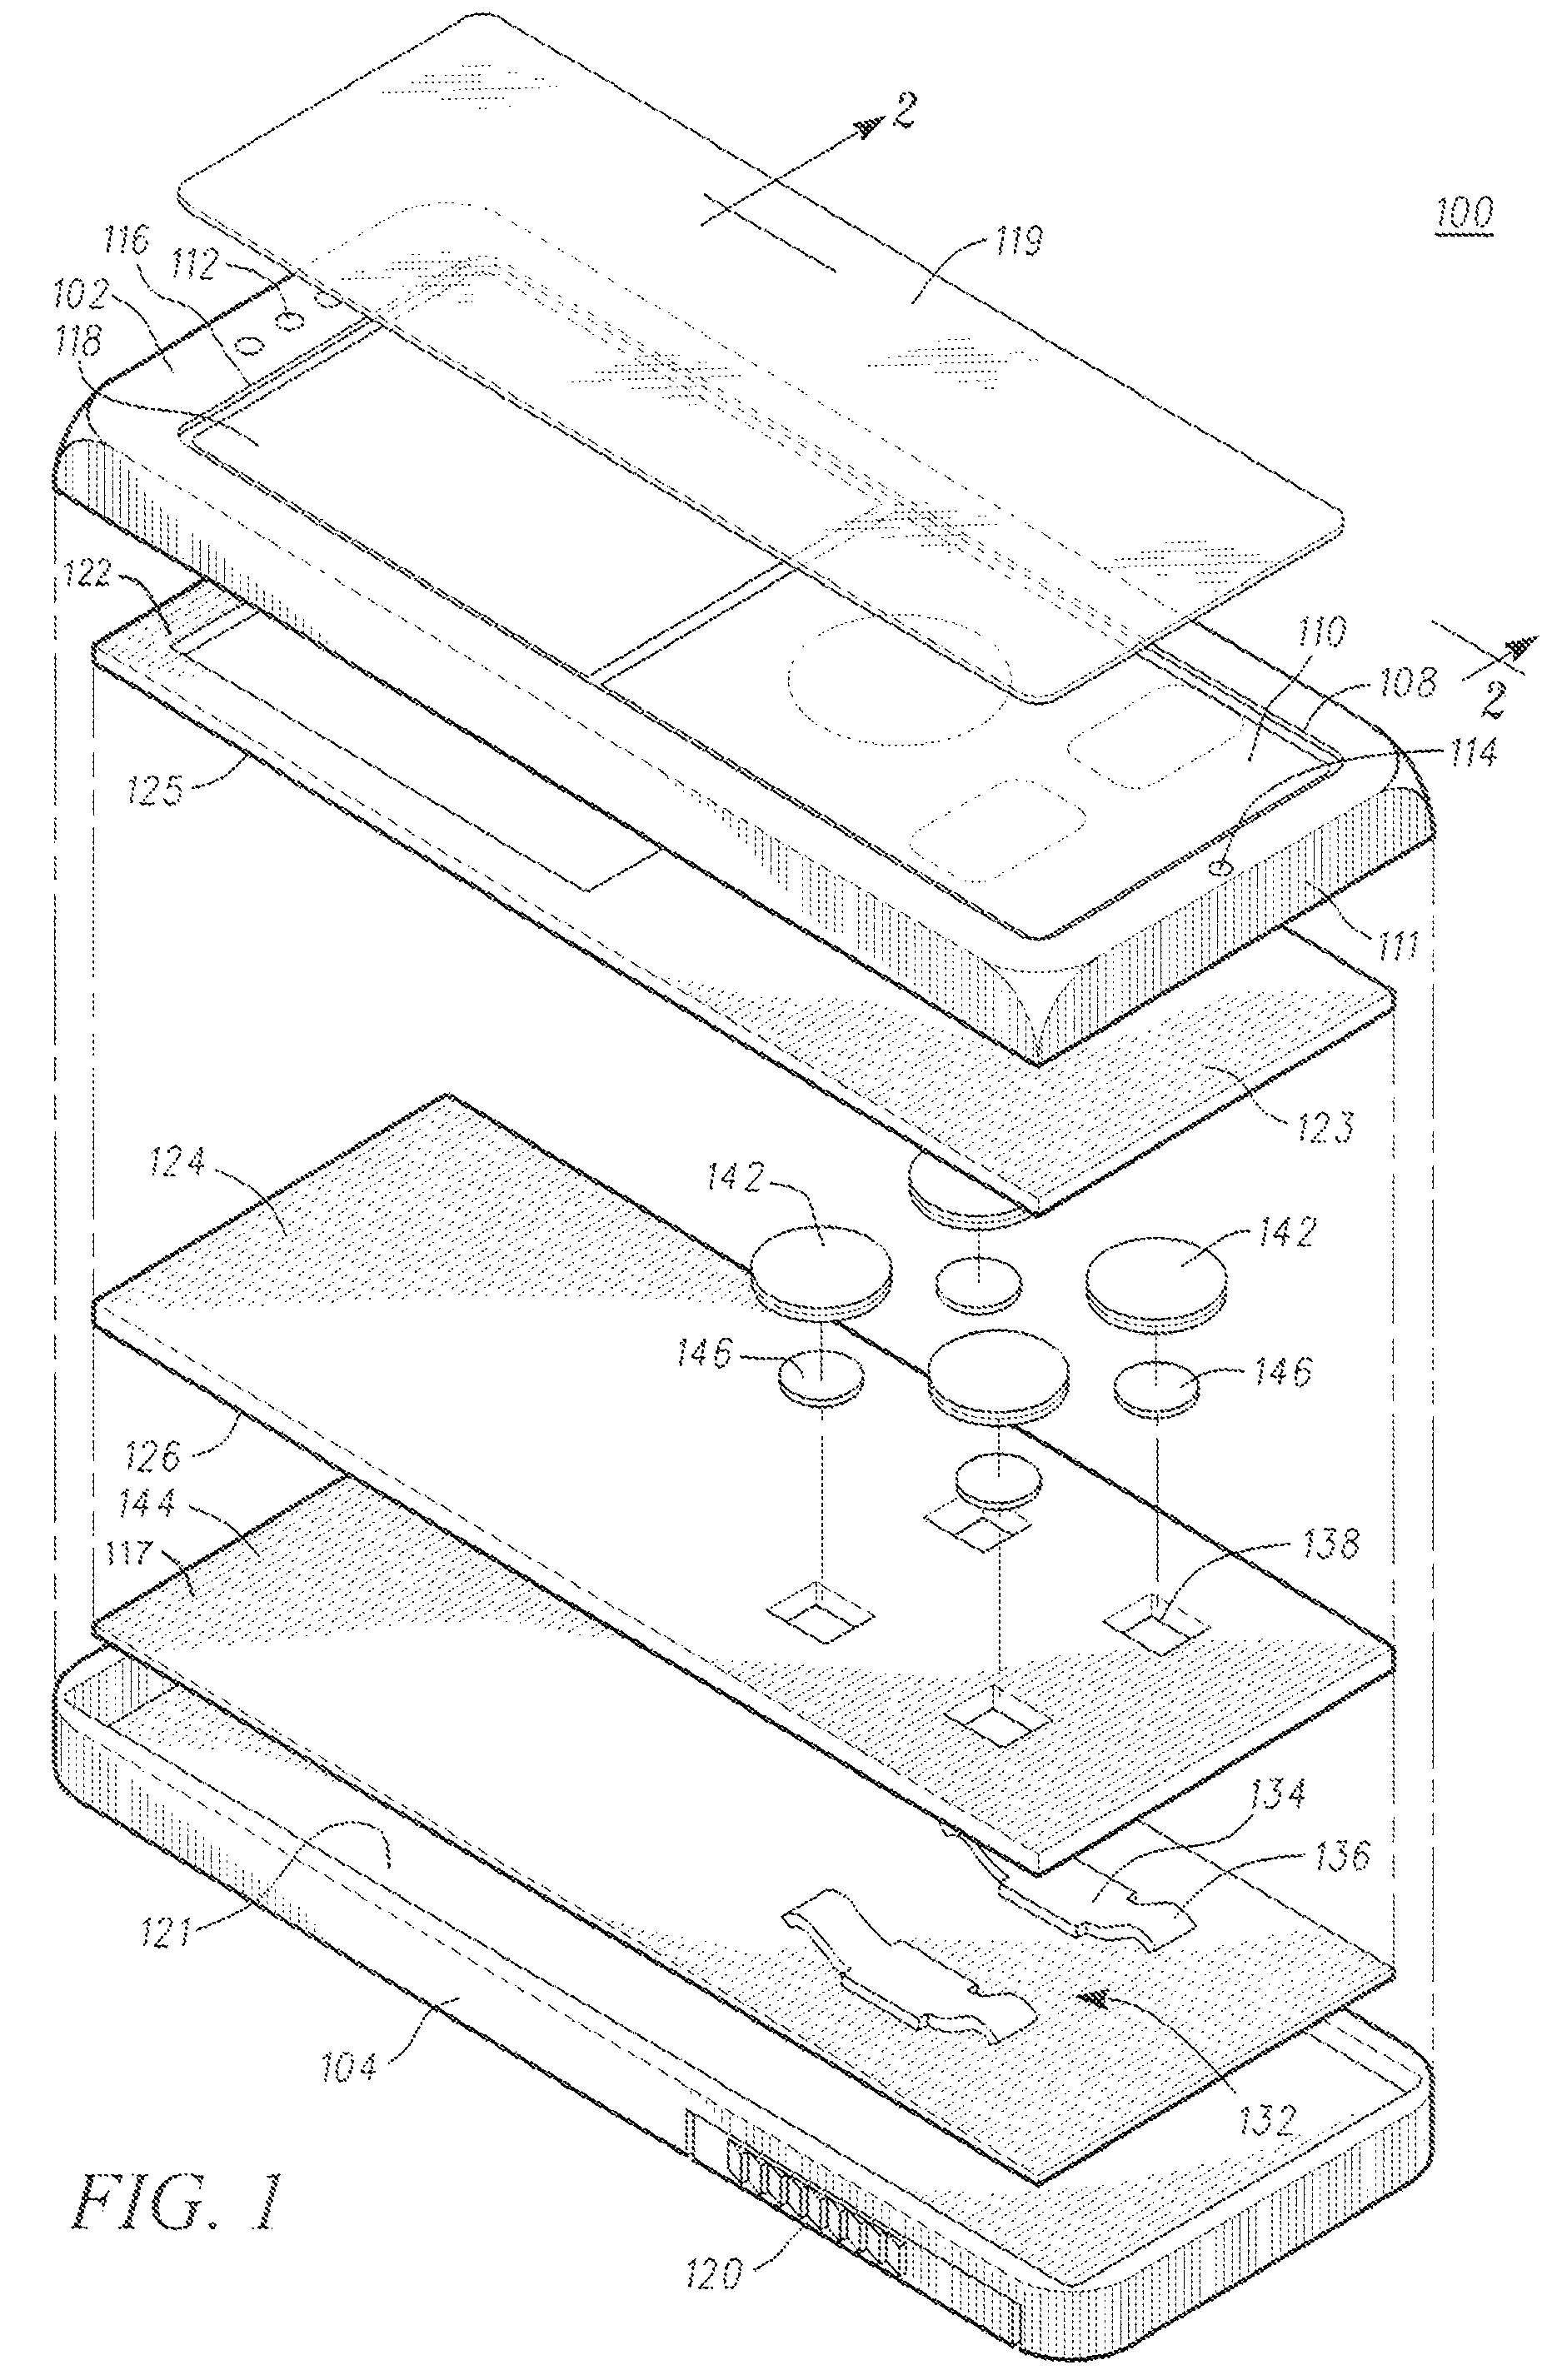 Electronic device and circuit for providing tactile feedback